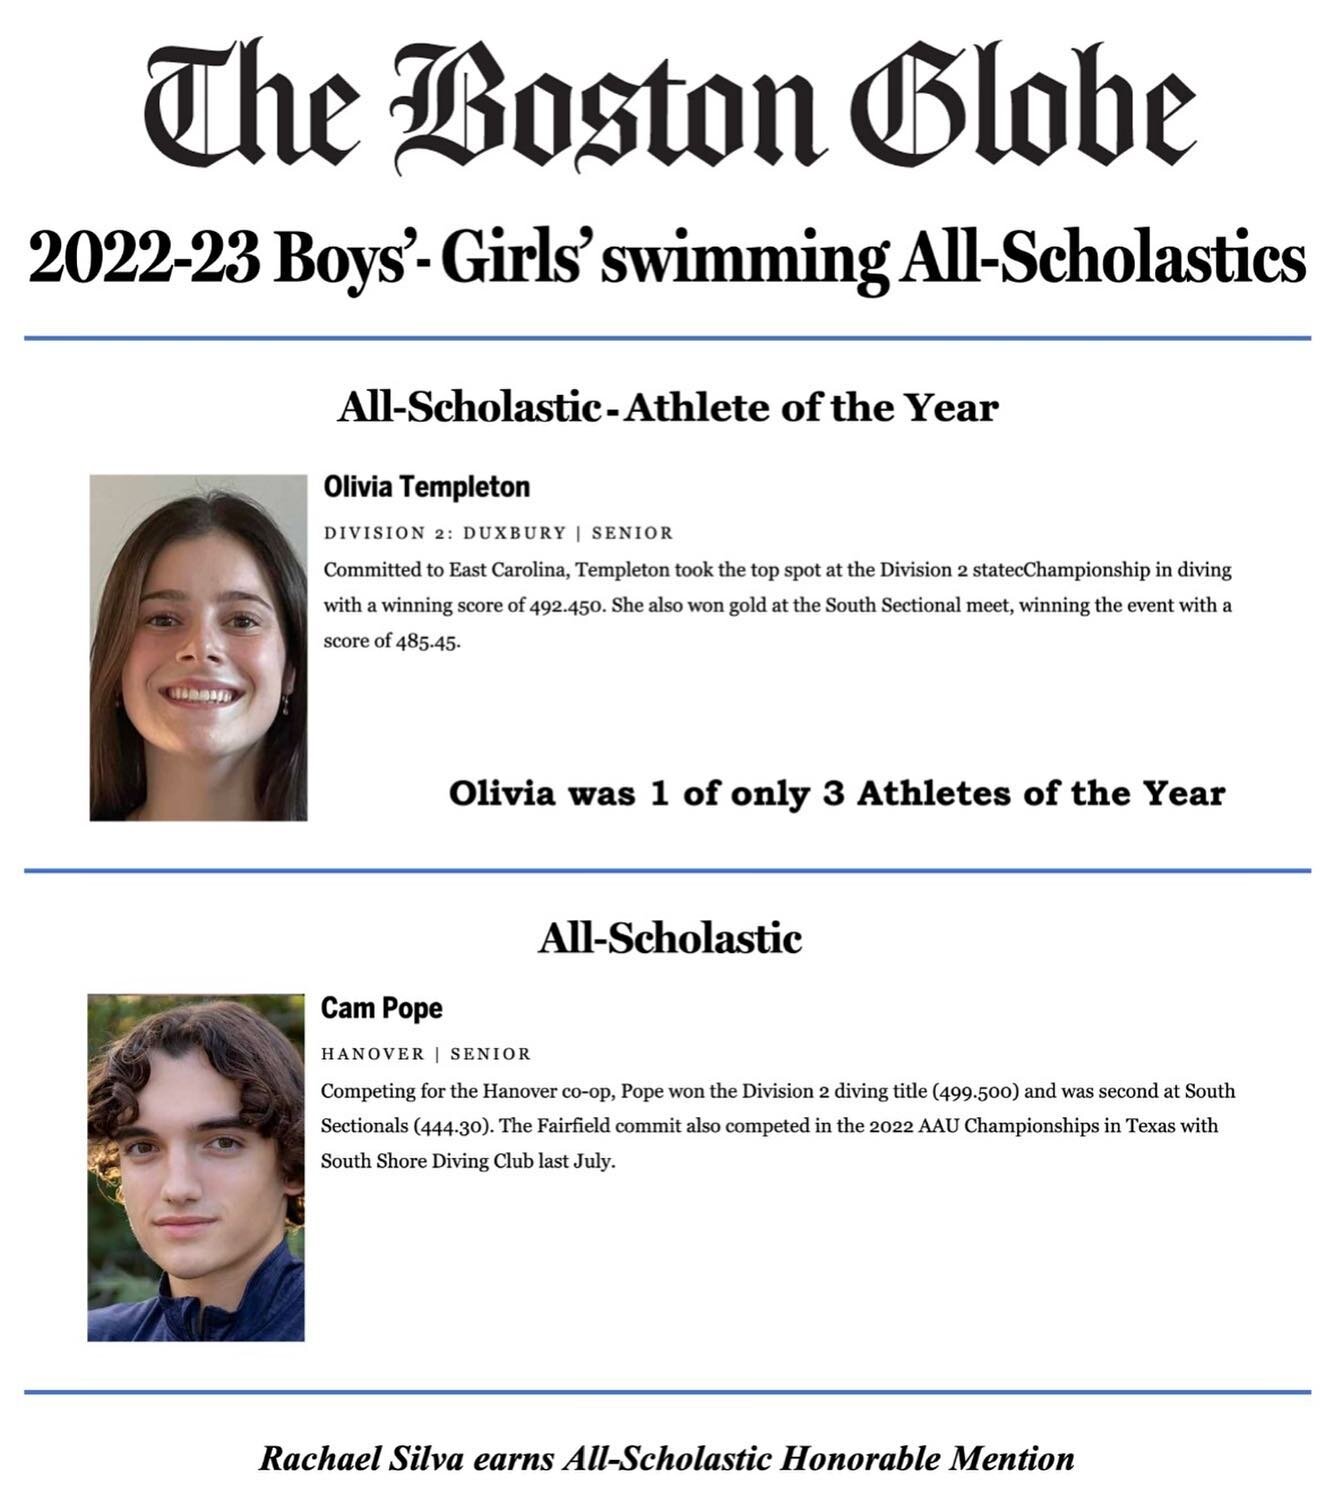 Congratulations to Olivia Templeton for earning The Boston Globe All-Scholastic &ldquo;Athlete of the Year!&rdquo; Congratulations are also in order for Cam Pope for earning The Boston Globes All-Scholastic team!  Both Olivia and Cam are also D2 STAT